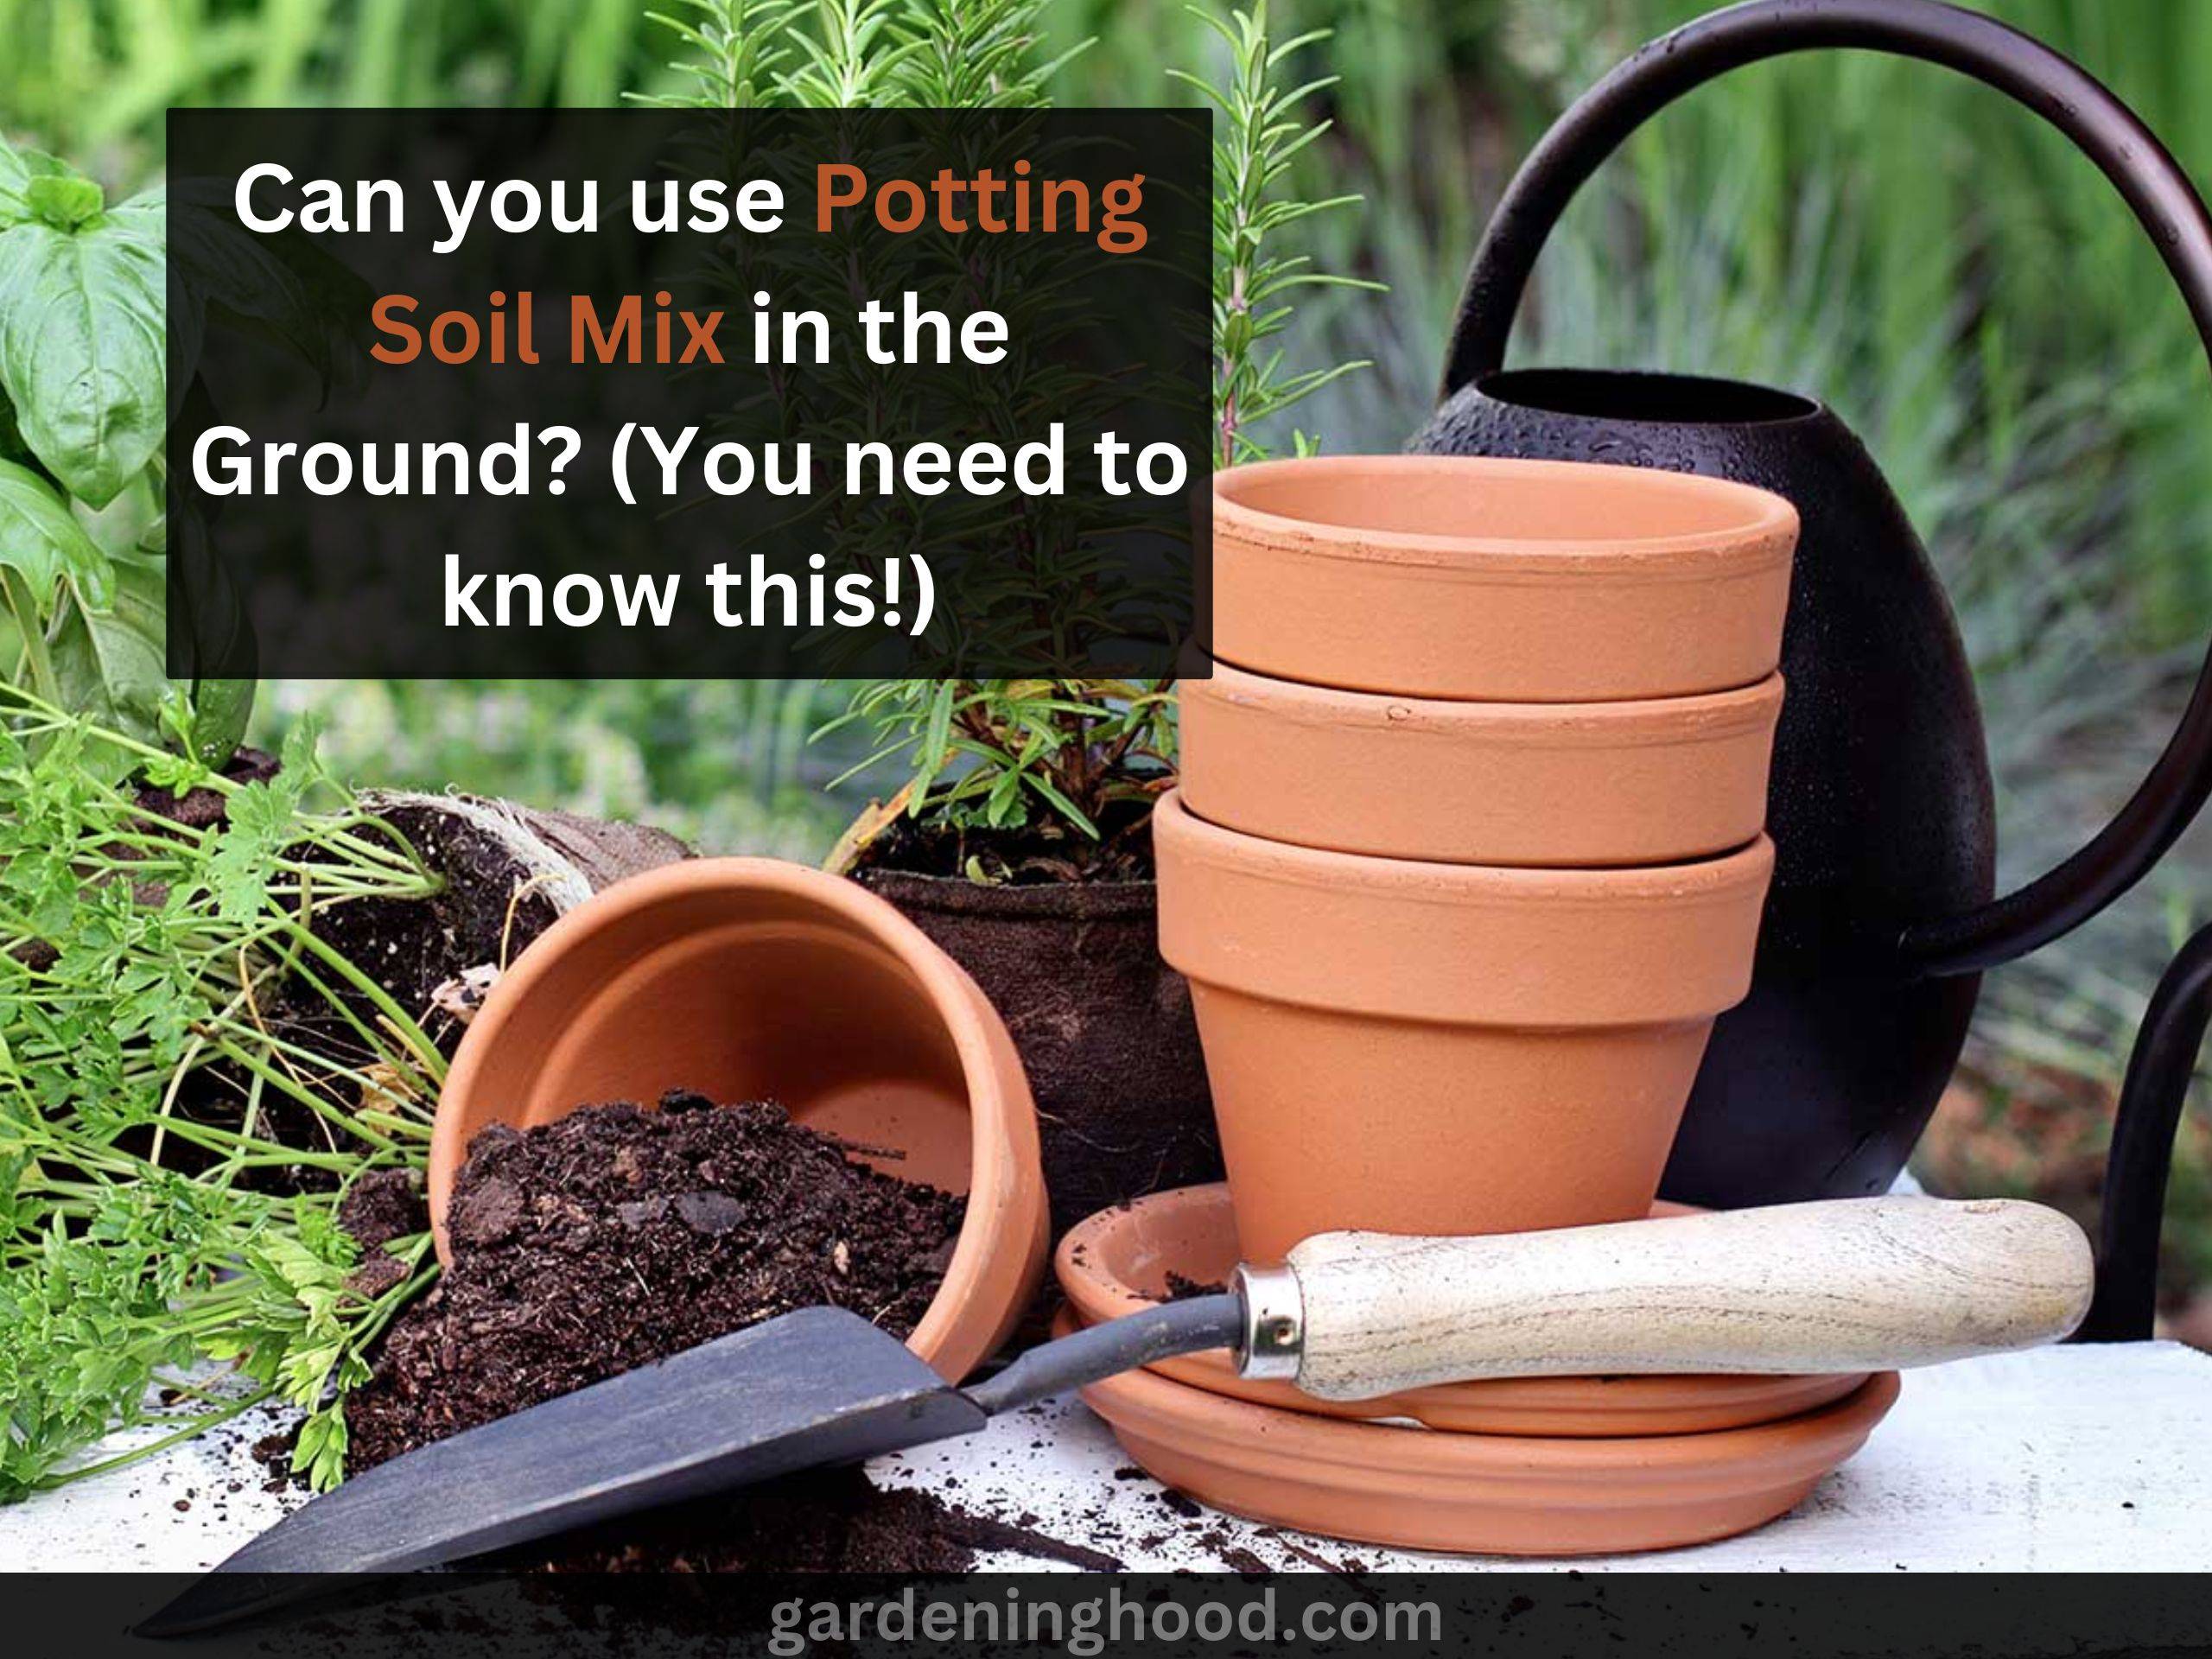 Can you use Potting Soil Mix in the Ground? (You need to know this!)